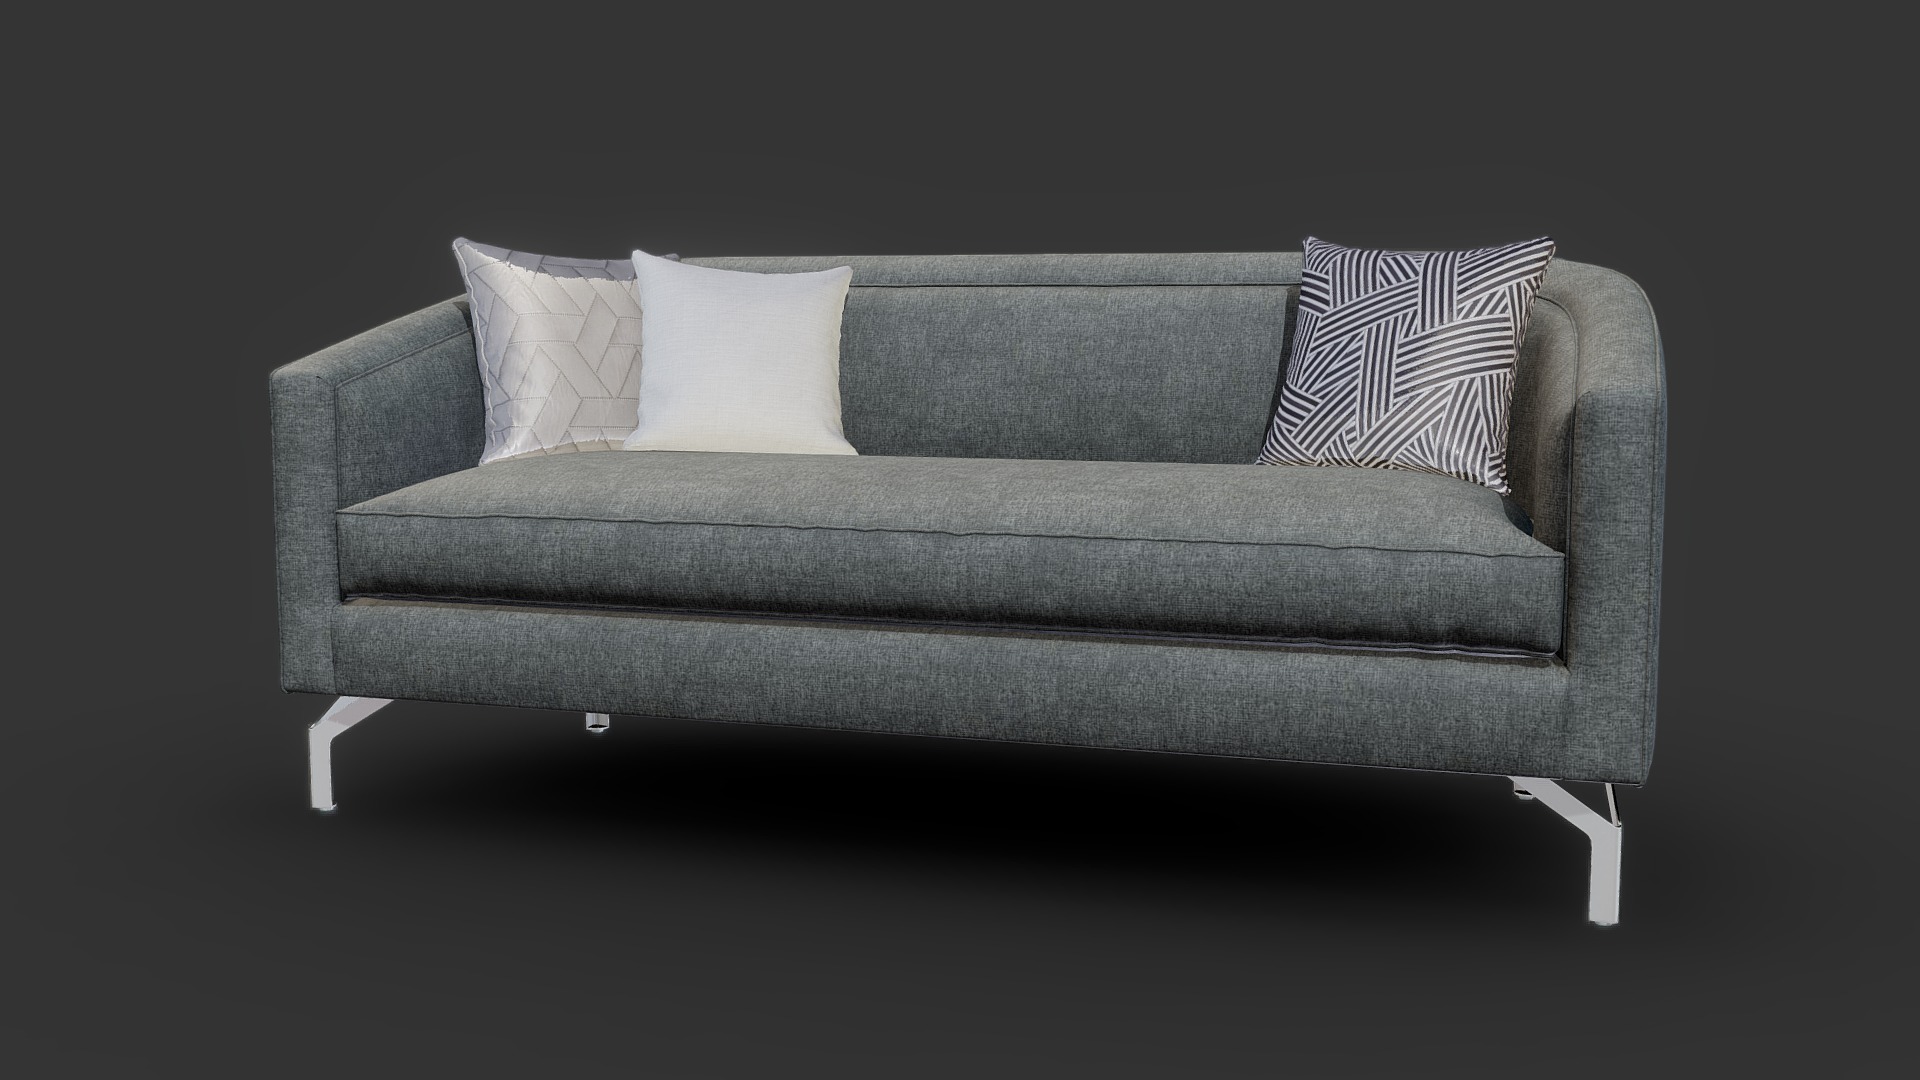 3D model Annette Cabriole Sofa - This is a 3D model of the Annette Cabriole Sofa. The 3D model is about a couch with pillows.